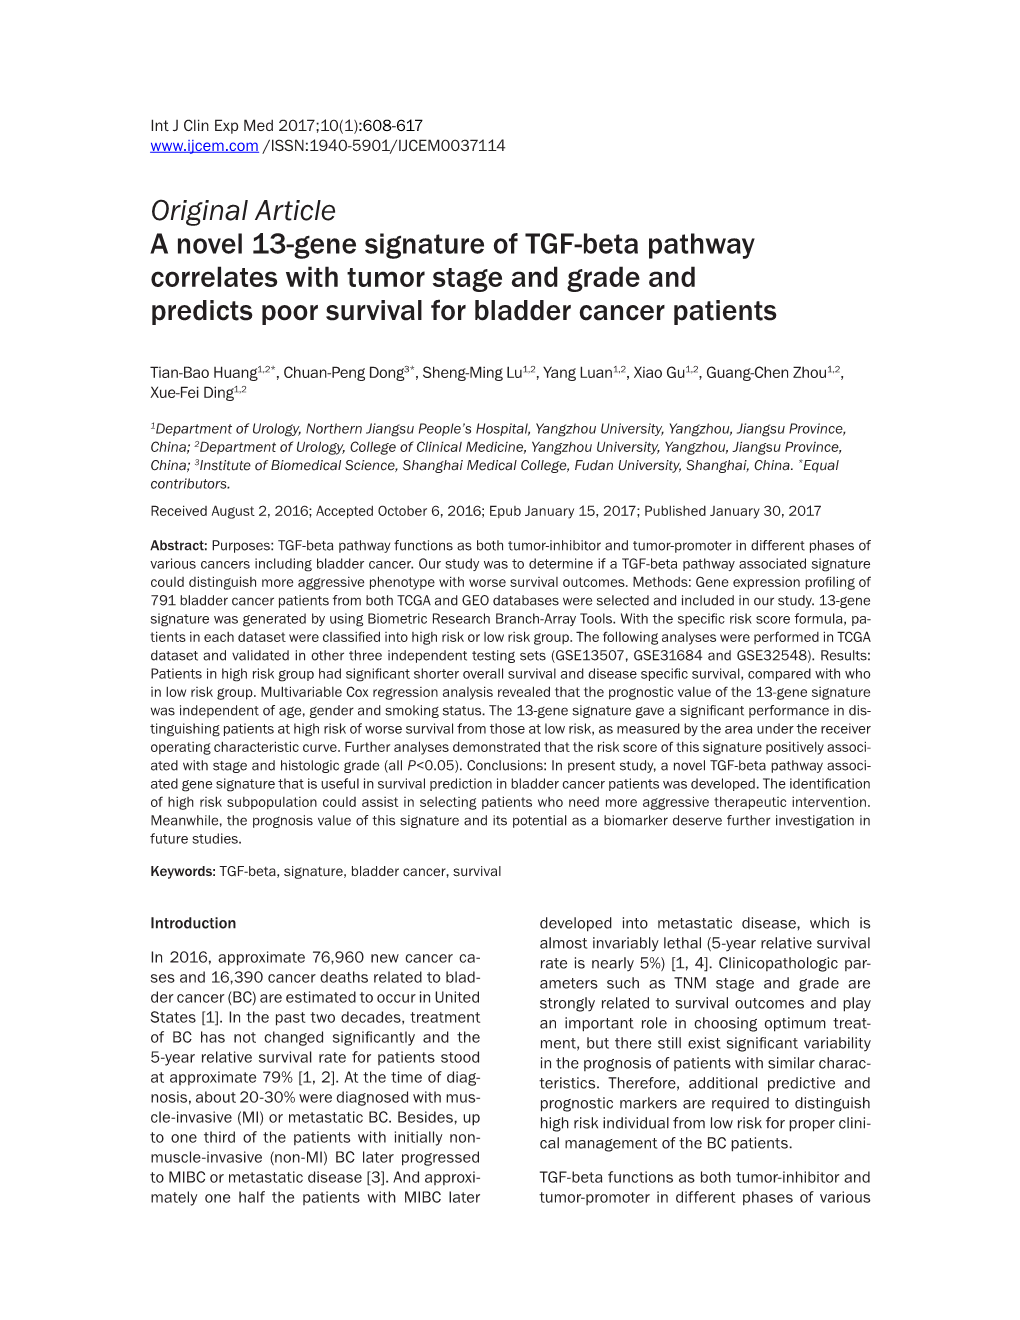 Original Article a Novel 13-Gene Signature of TGF-Beta Pathway Correlates with Tumor Stage and Grade and Predicts Poor Survival for Bladder Cancer Patients